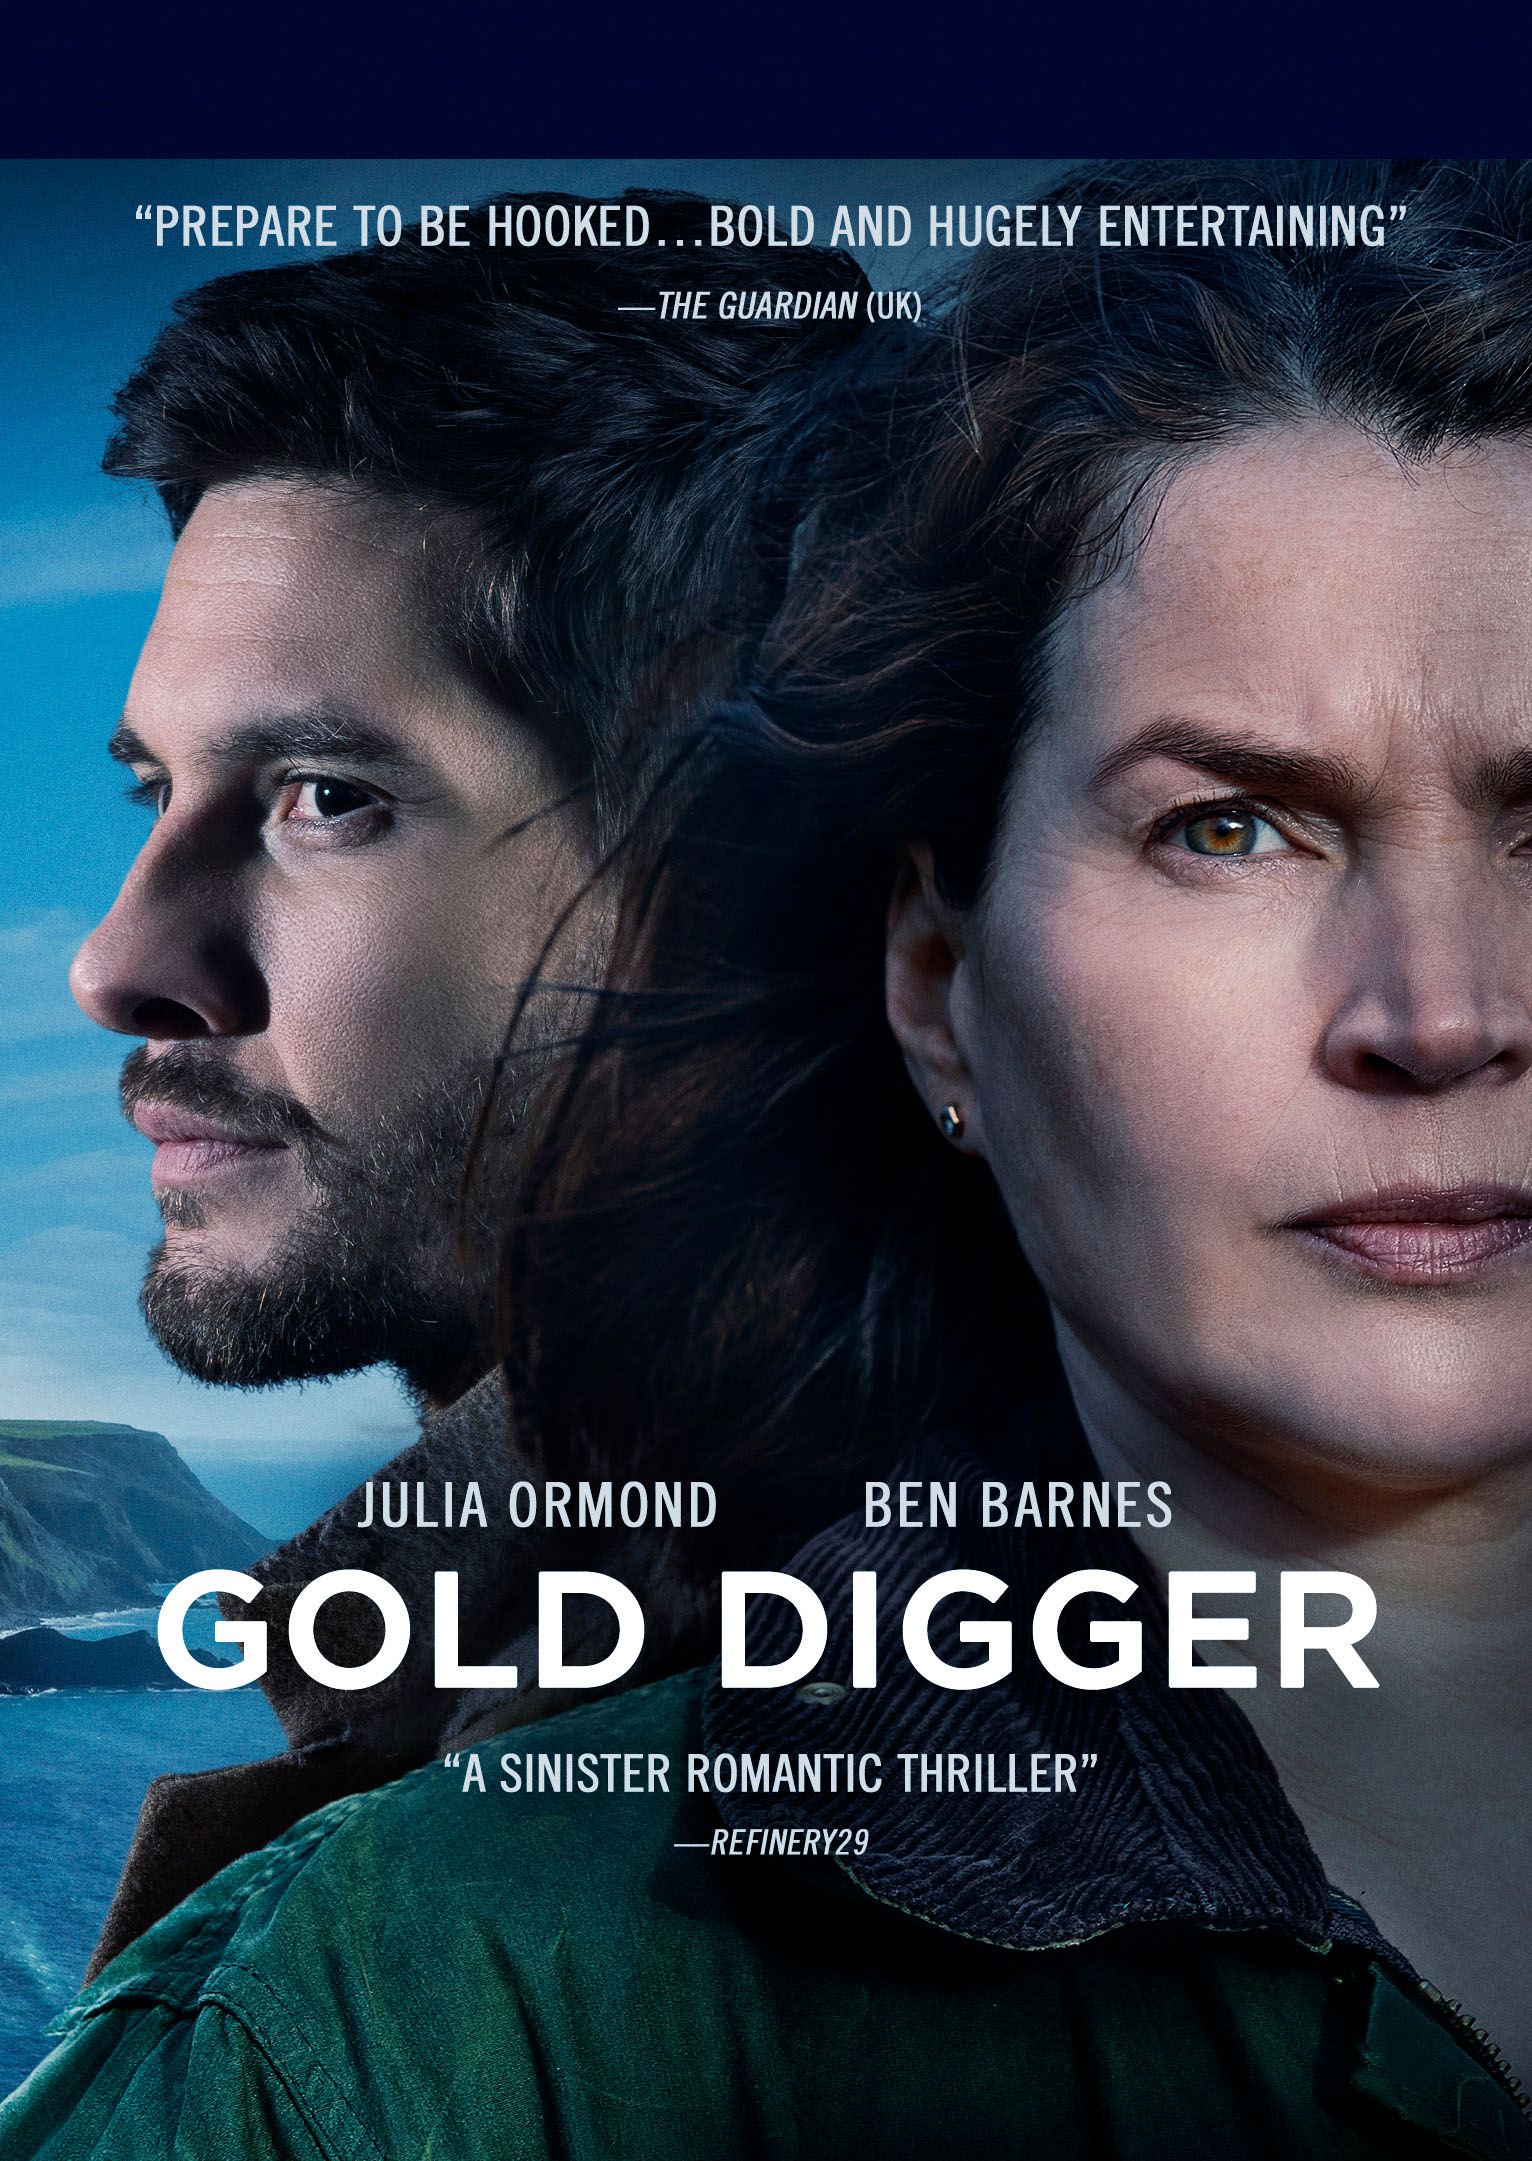 Watch Gold Diggers Online, Stream Seasons 1-3 Now